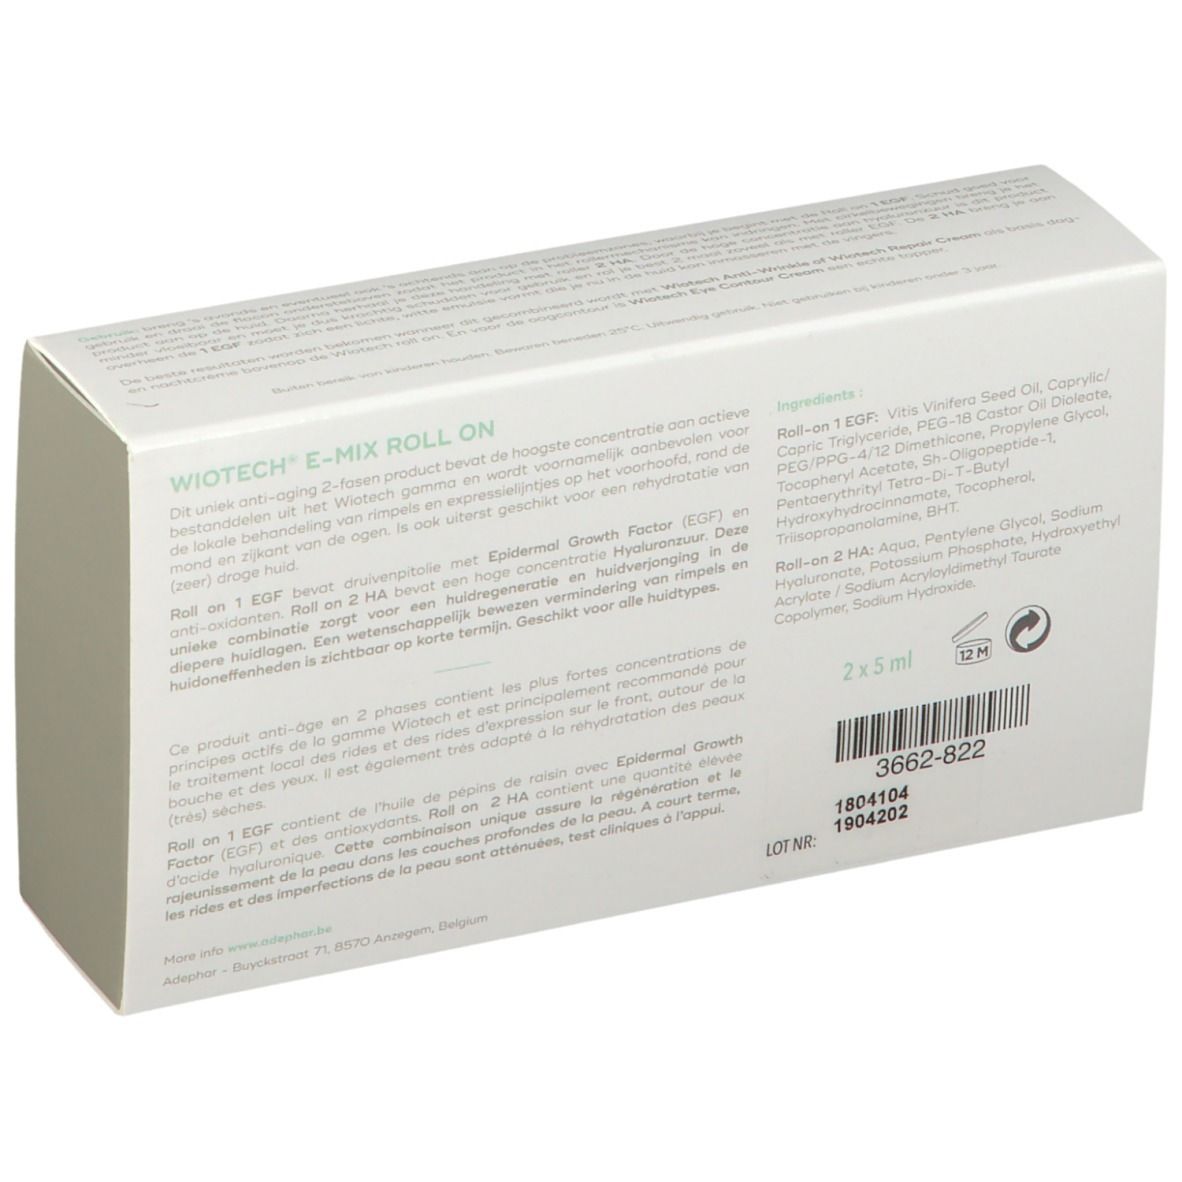 WIOTECH® Anti-Aging E-Mix Roll-On